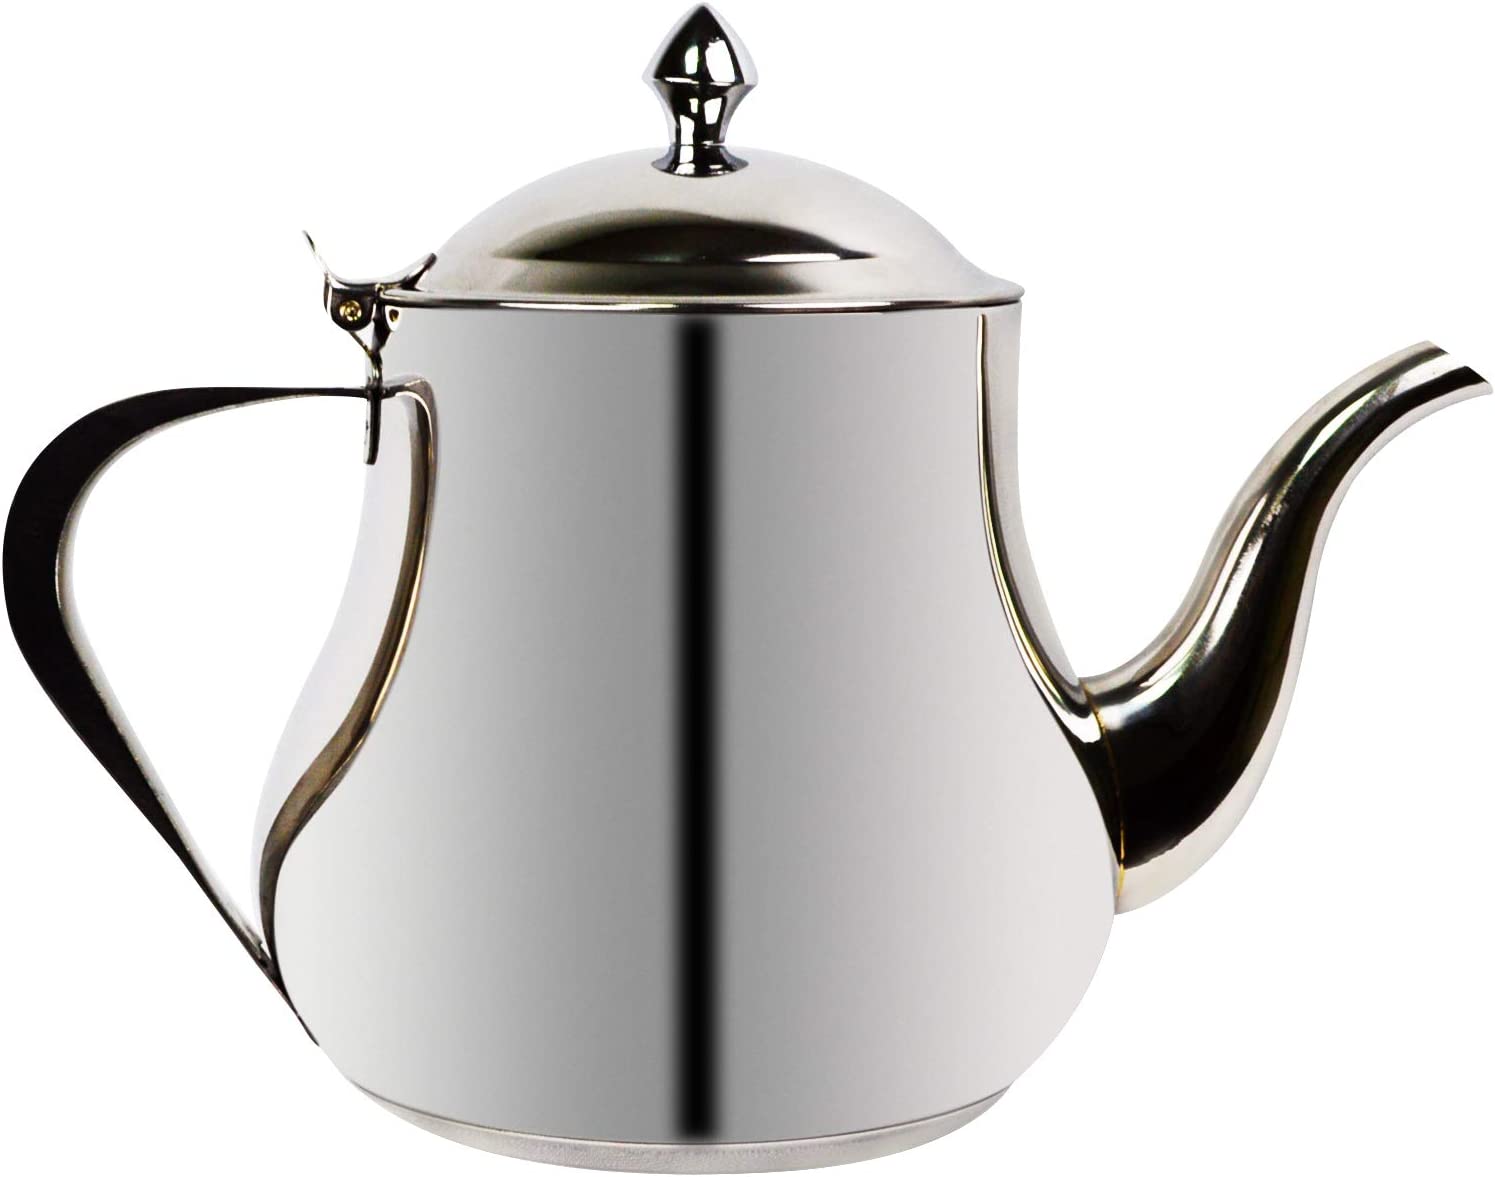 Ramadan24 Teapot with Induction Made of Stainless Steel | Moroccan Arabic Design | with Lid Tea Filter Spout & Handles | 3-in-1 Coffee Pot, Kettle (0.8)